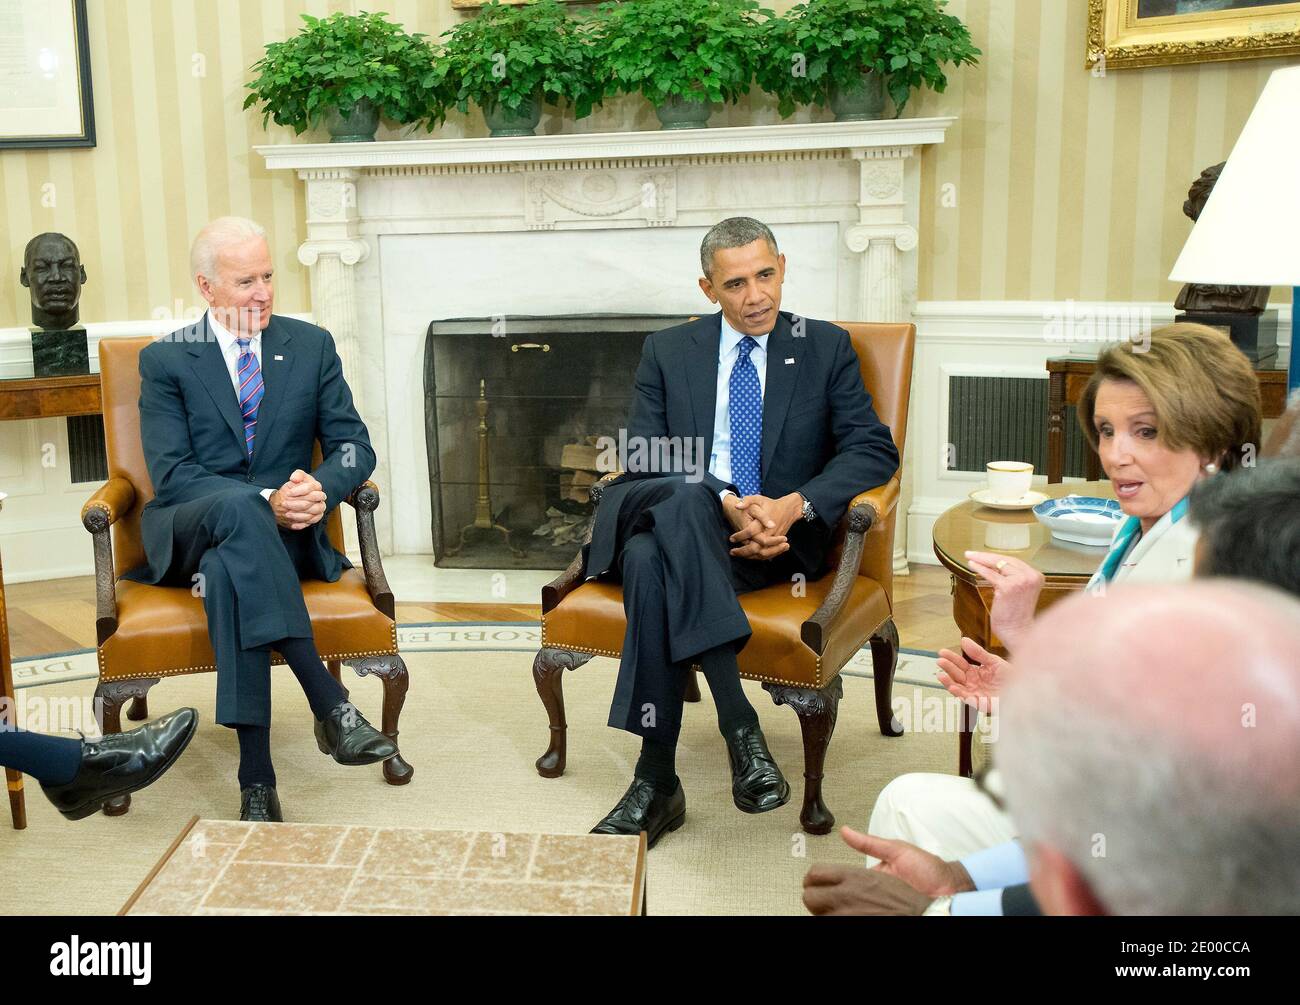 United States President Barack Obama and Vice President Joe Biden meet with members of the U.S. House Democratic Leadership including U.S. House Democratic Leader Nancy Pelosi (Democrat of California), right. Washington, DC, USA, October 15, 2013. Photo by Ron Sachs/CNP/ABACAPRESS.COM Stock Photo